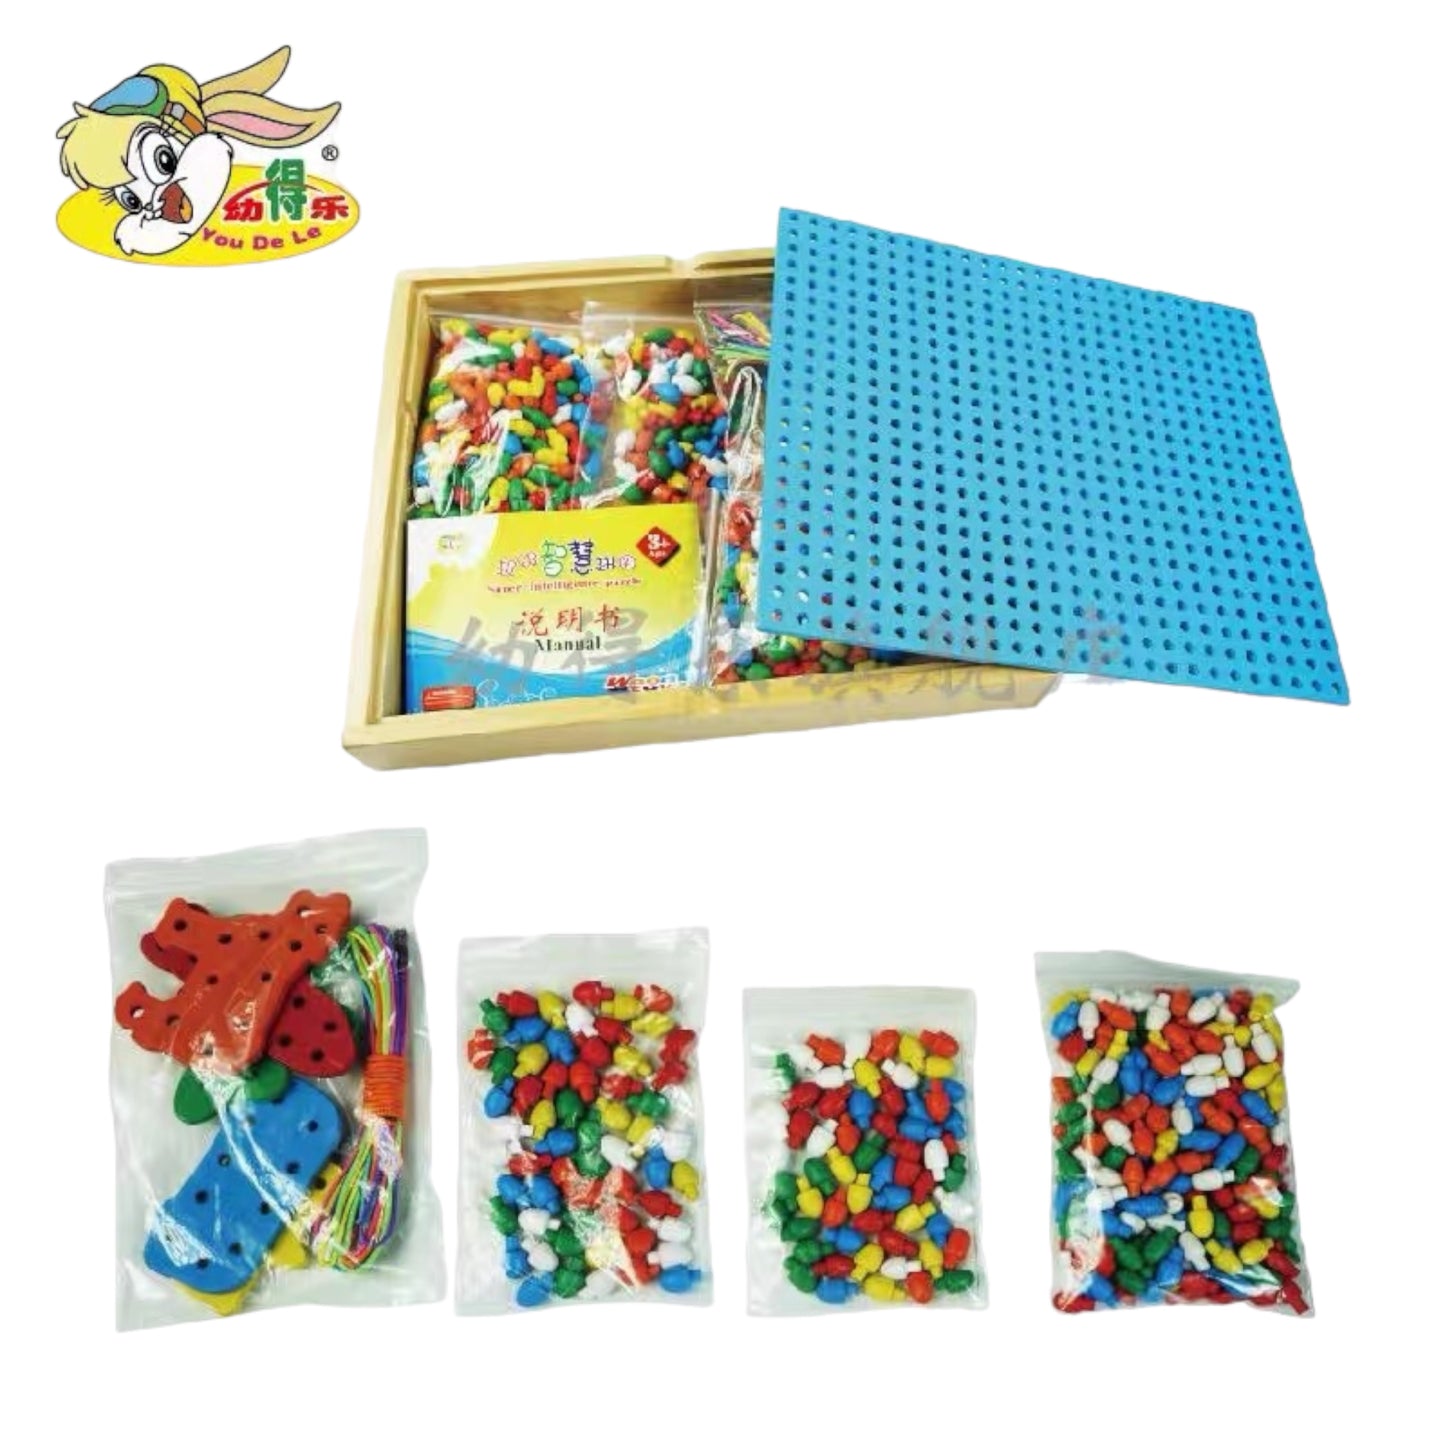 Wooden Mosaic Beads Pegs Board and Threading Activity Box